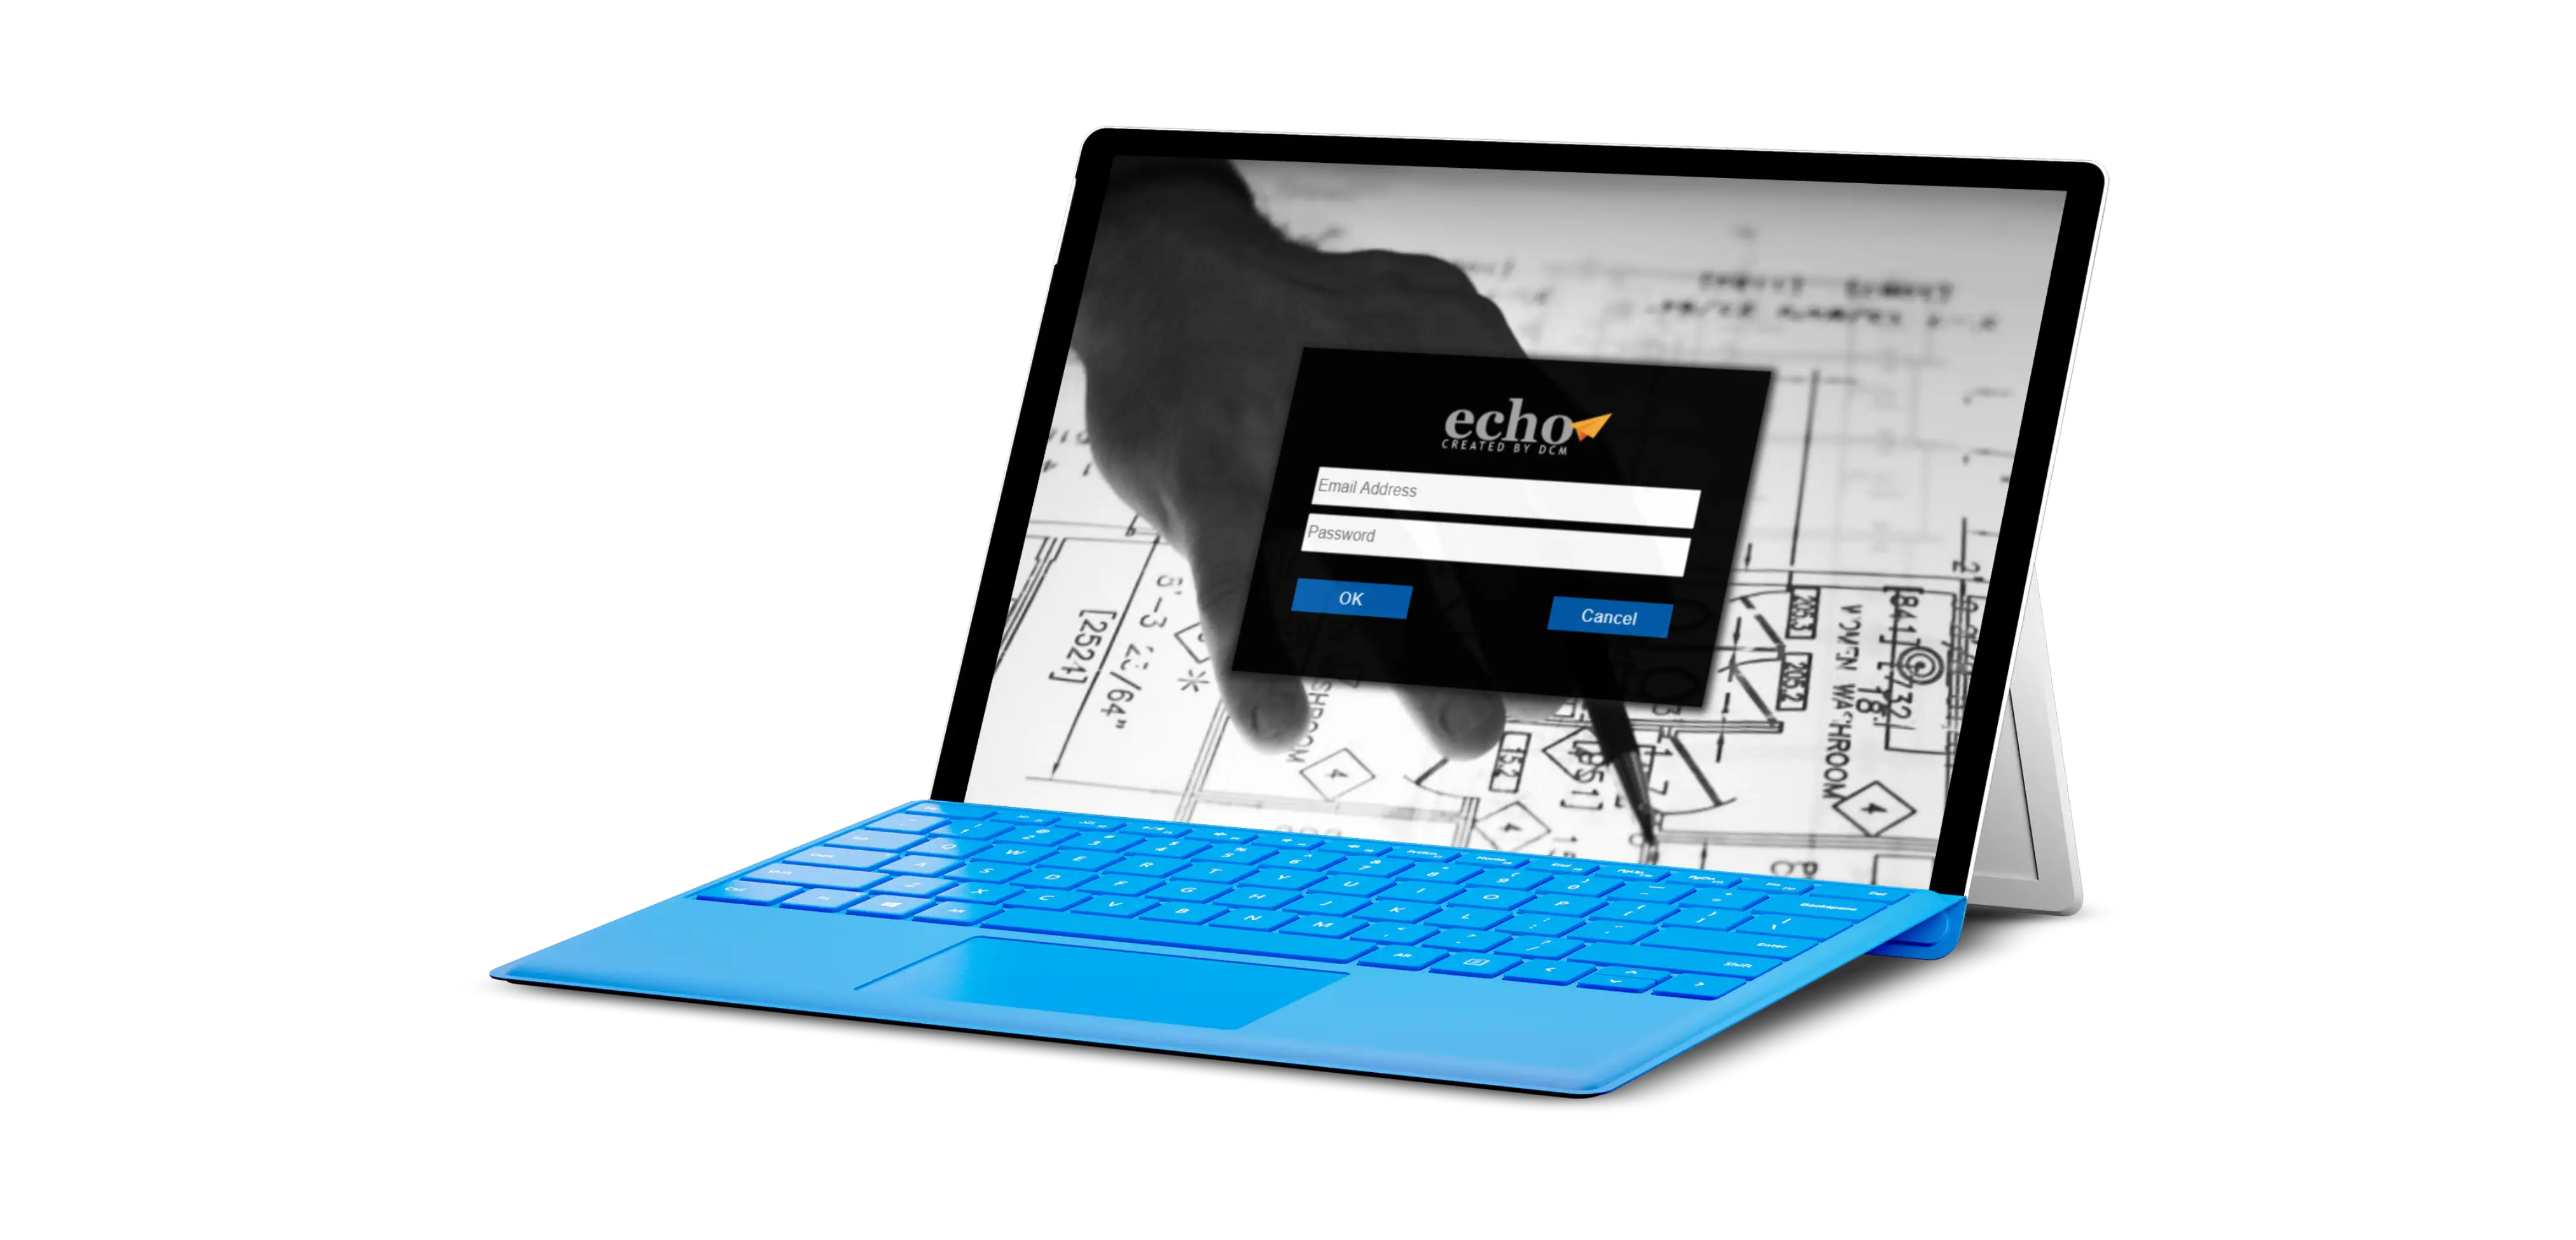 Echo Drawing Management Software on Tablet - Find your drawings in seconds